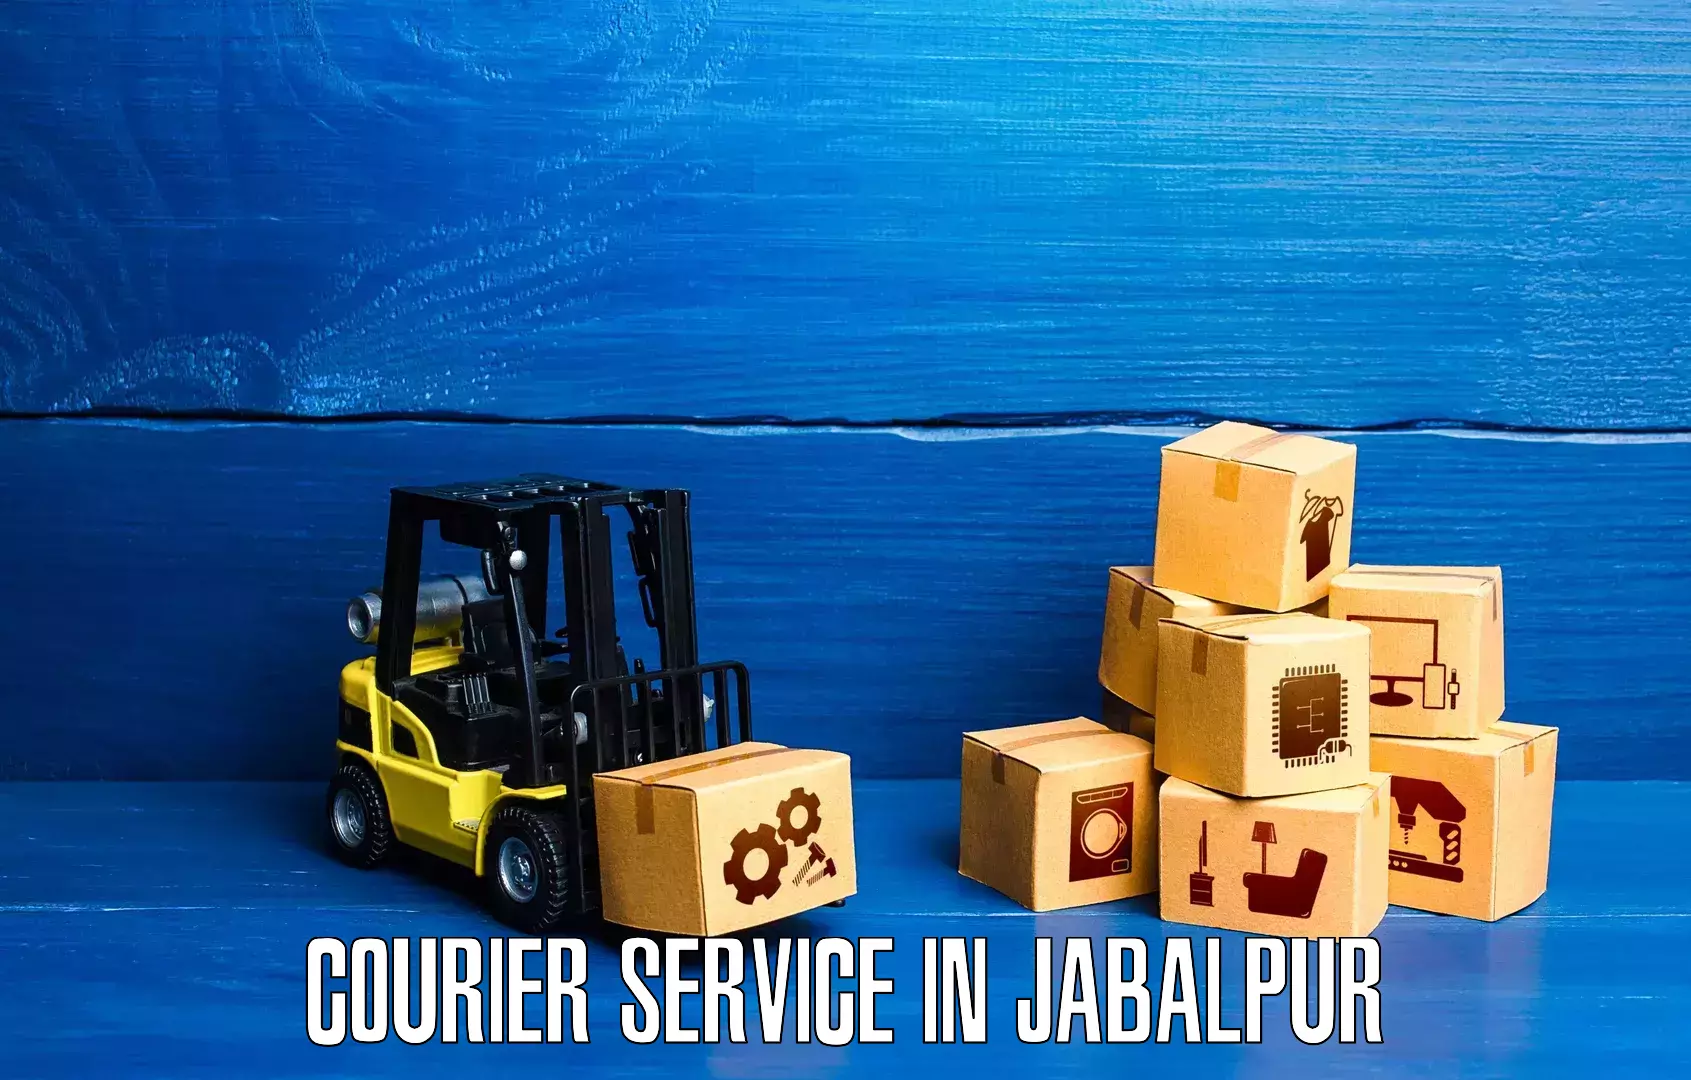 Courier service booking in Jabalpur